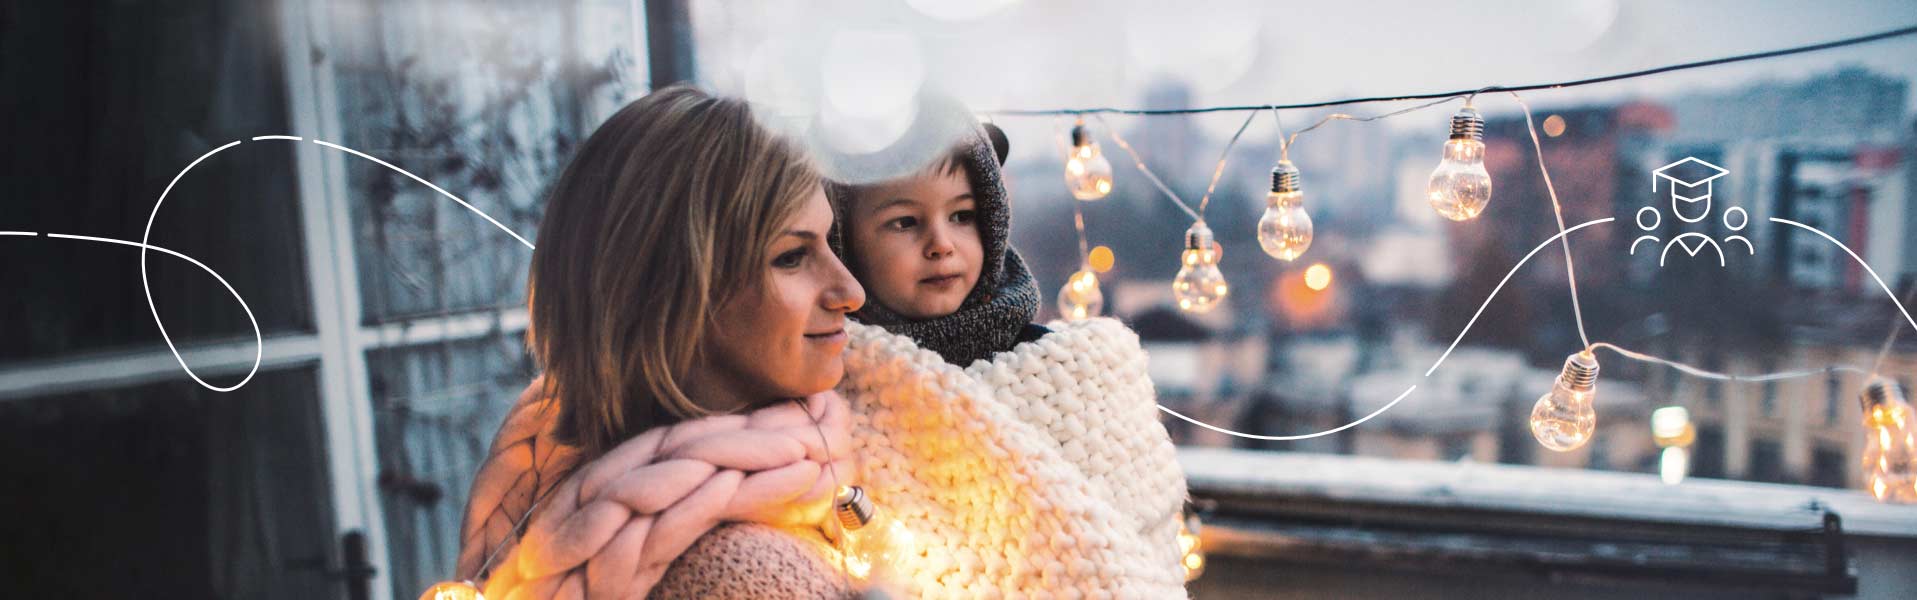 Mother holds her son while standing on an apartment balcony overlooking the city. They're wrapped in cozy knits and admiring twinkling string lights.